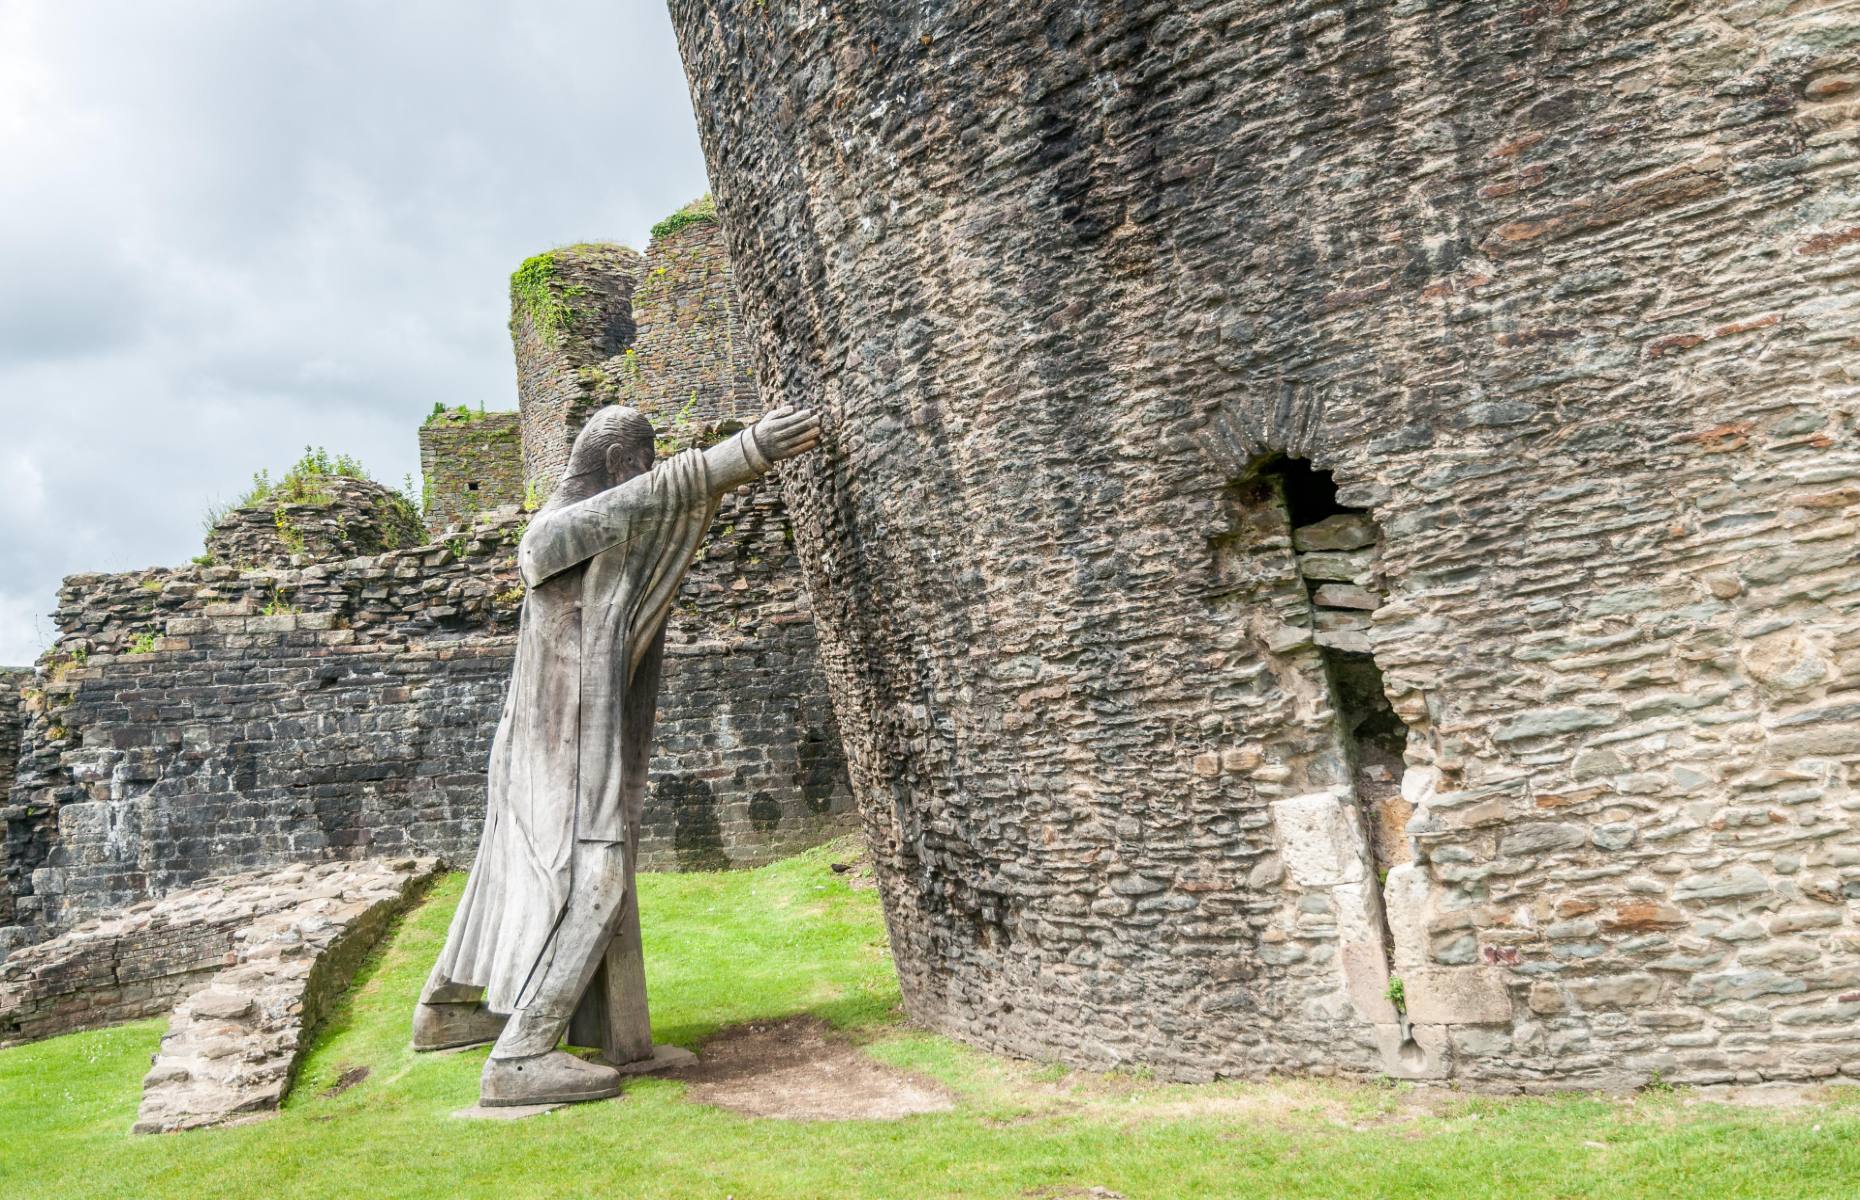 Fourth Marquess of Bute state at Caerphilly Castle (Image: Mihai Barbat / Alamy Stock Photo)